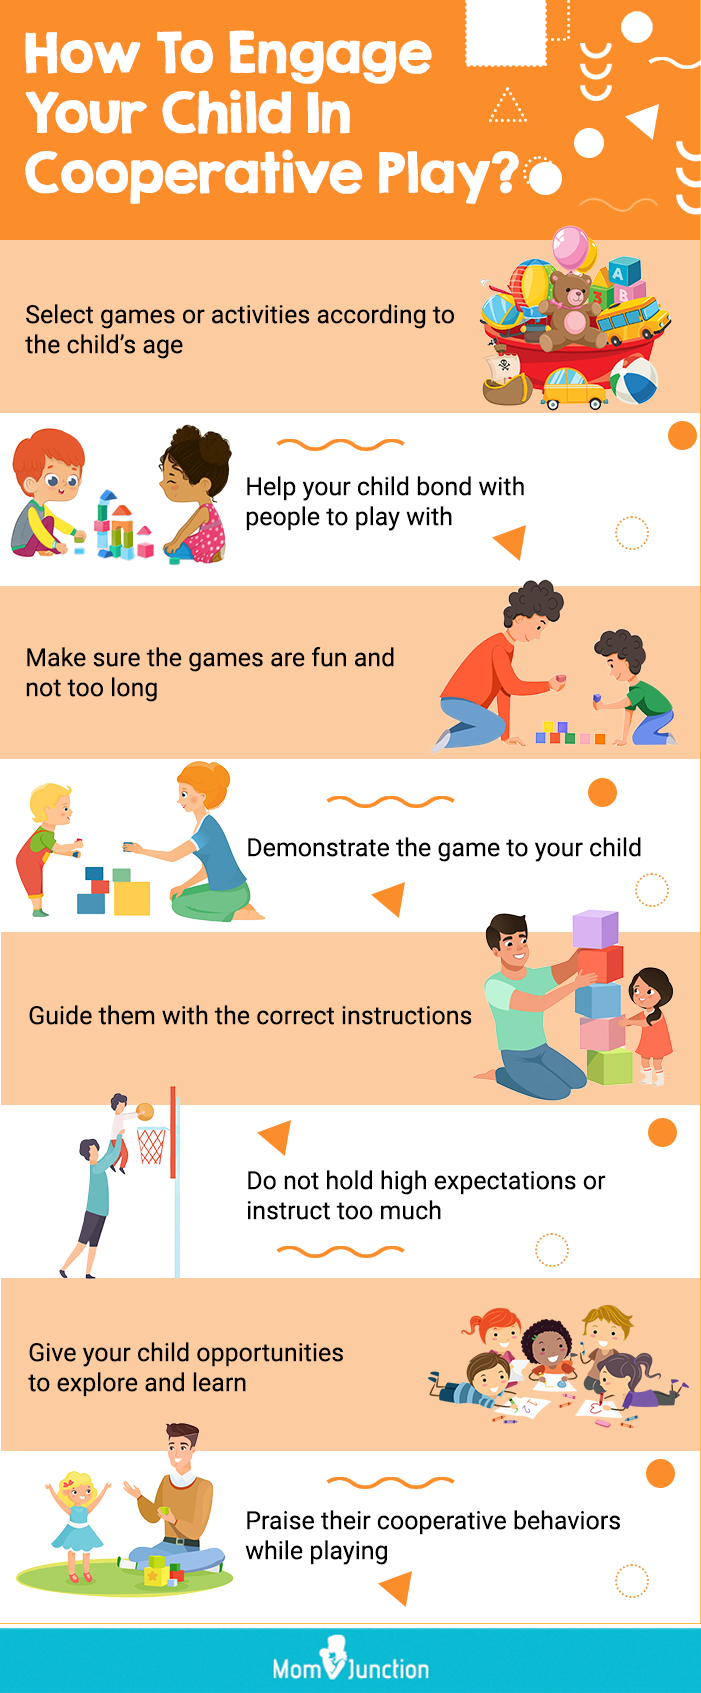 how to engage your child in cooperative play (infographic)